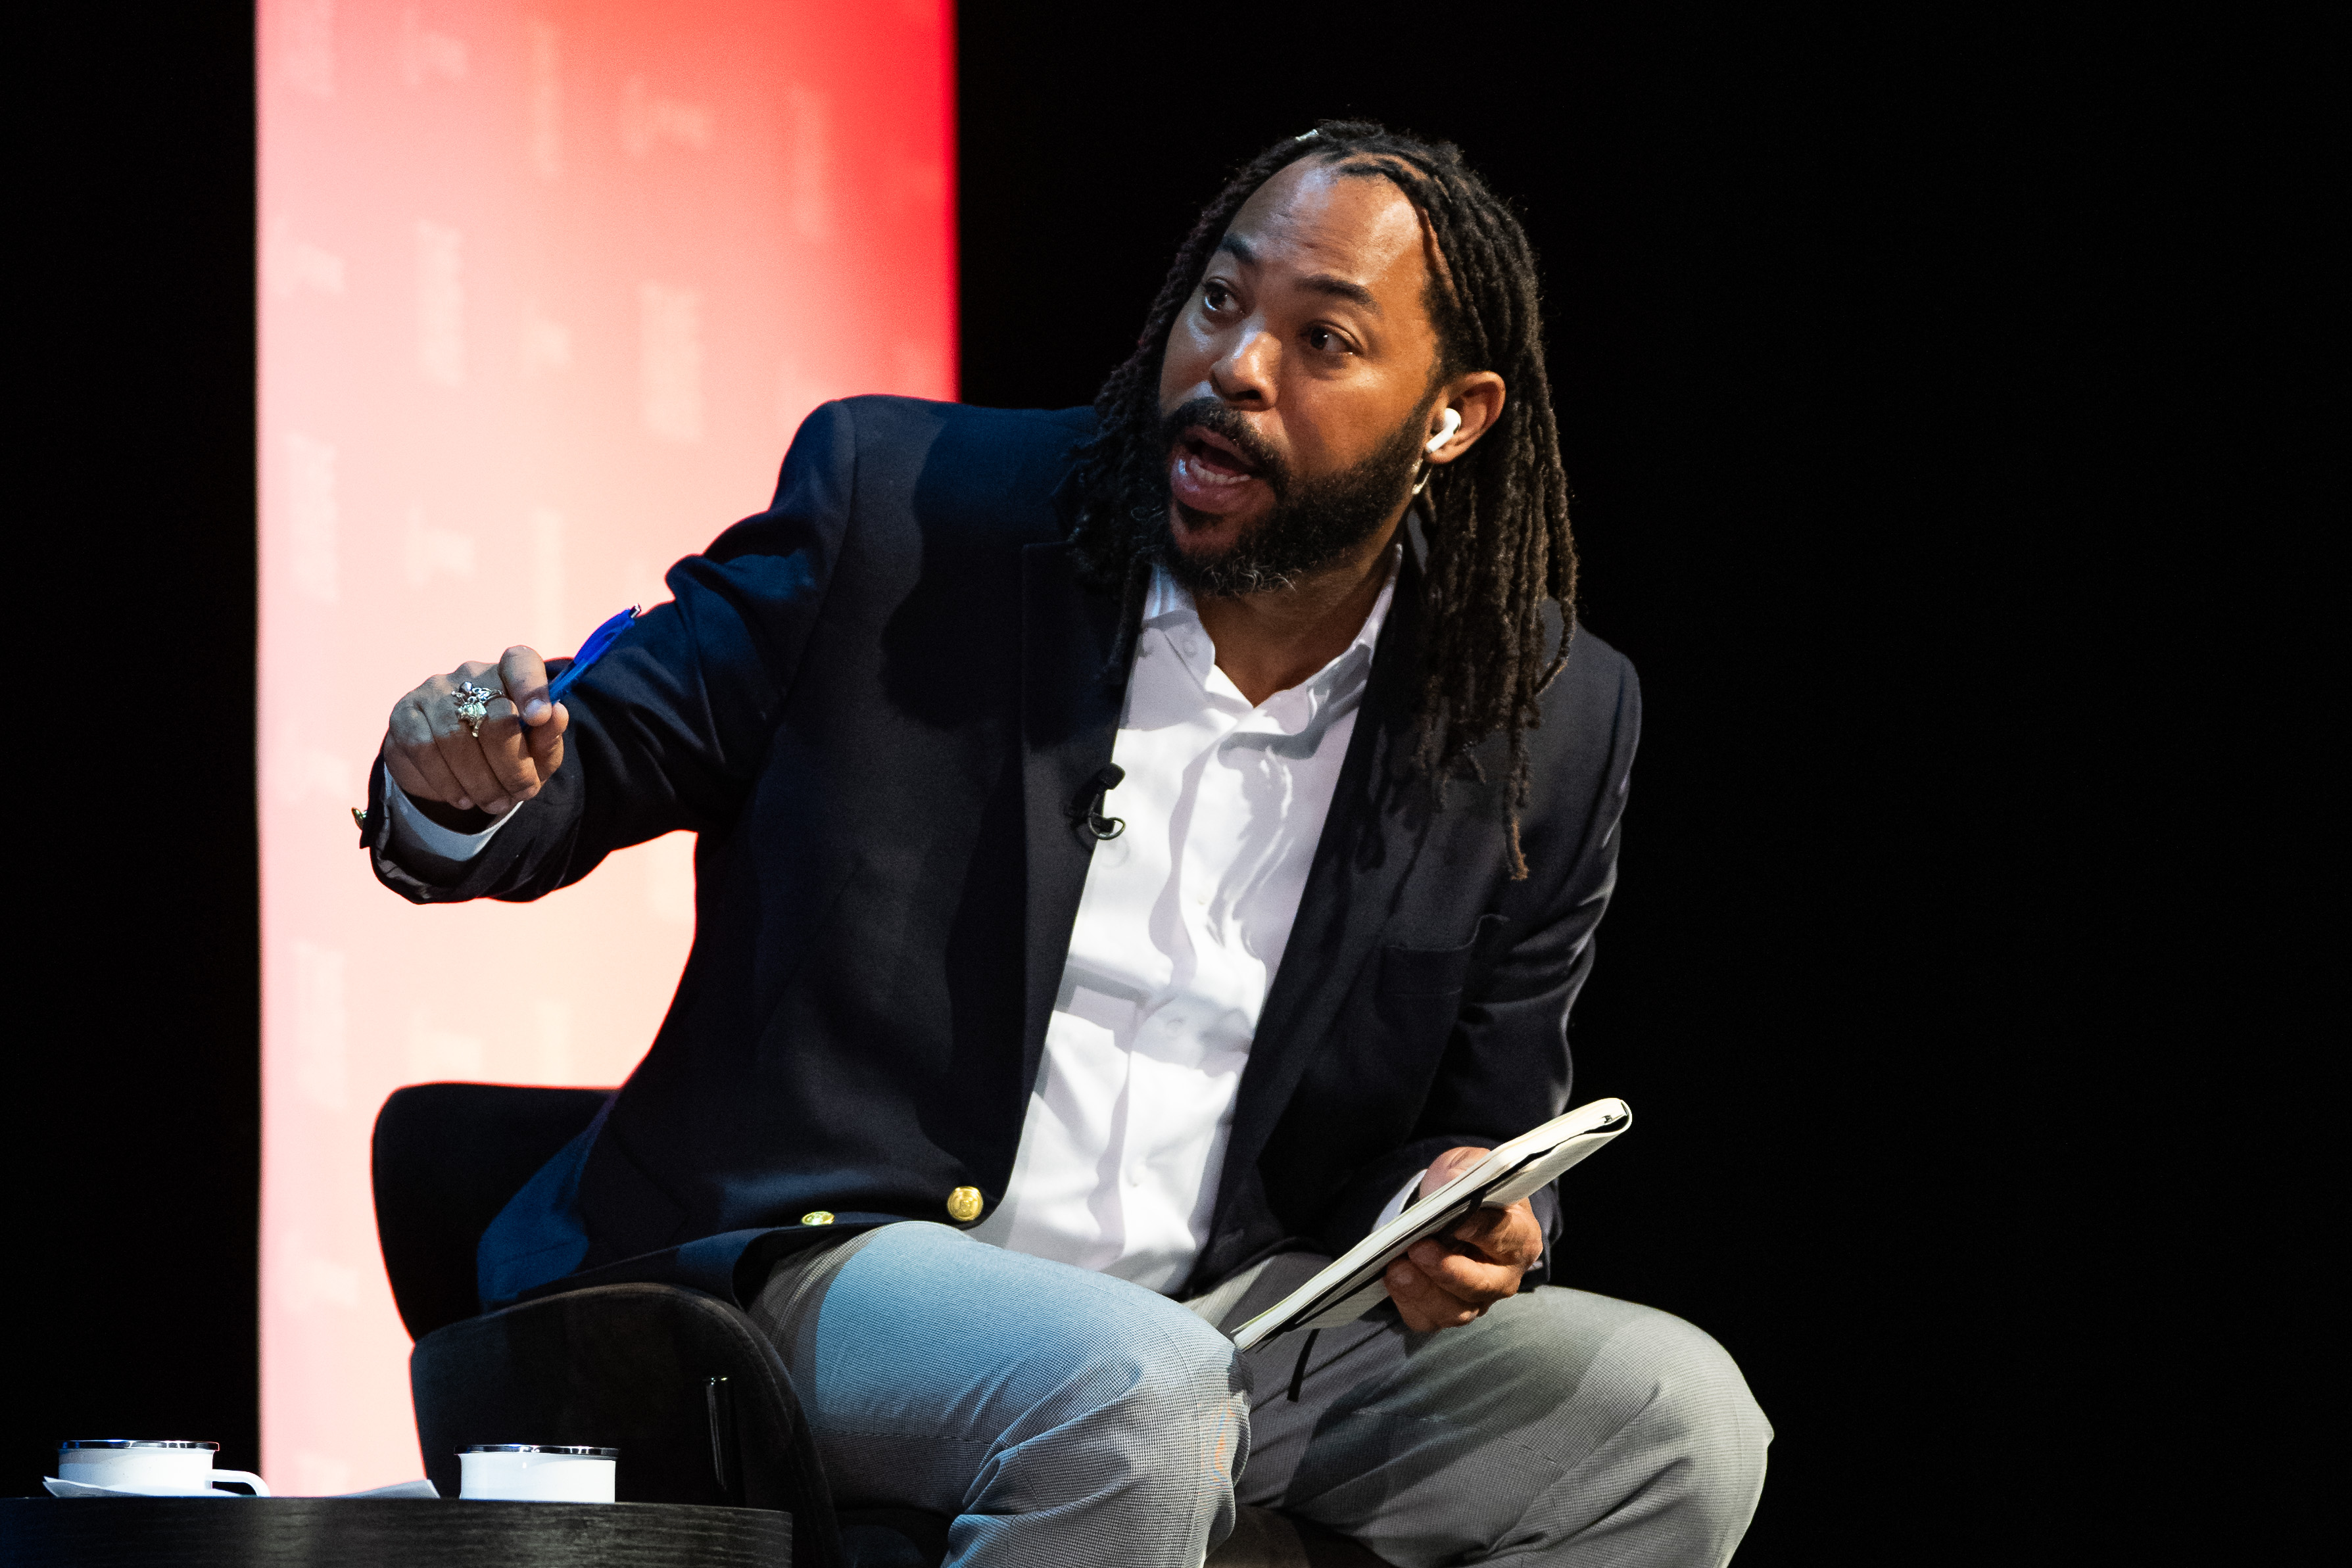 A man with dreadlocks, dressed in a dark blazer and light pants, is seated and holding a notebook. He is speaking animatedly, with a red and black backdrop behind him.